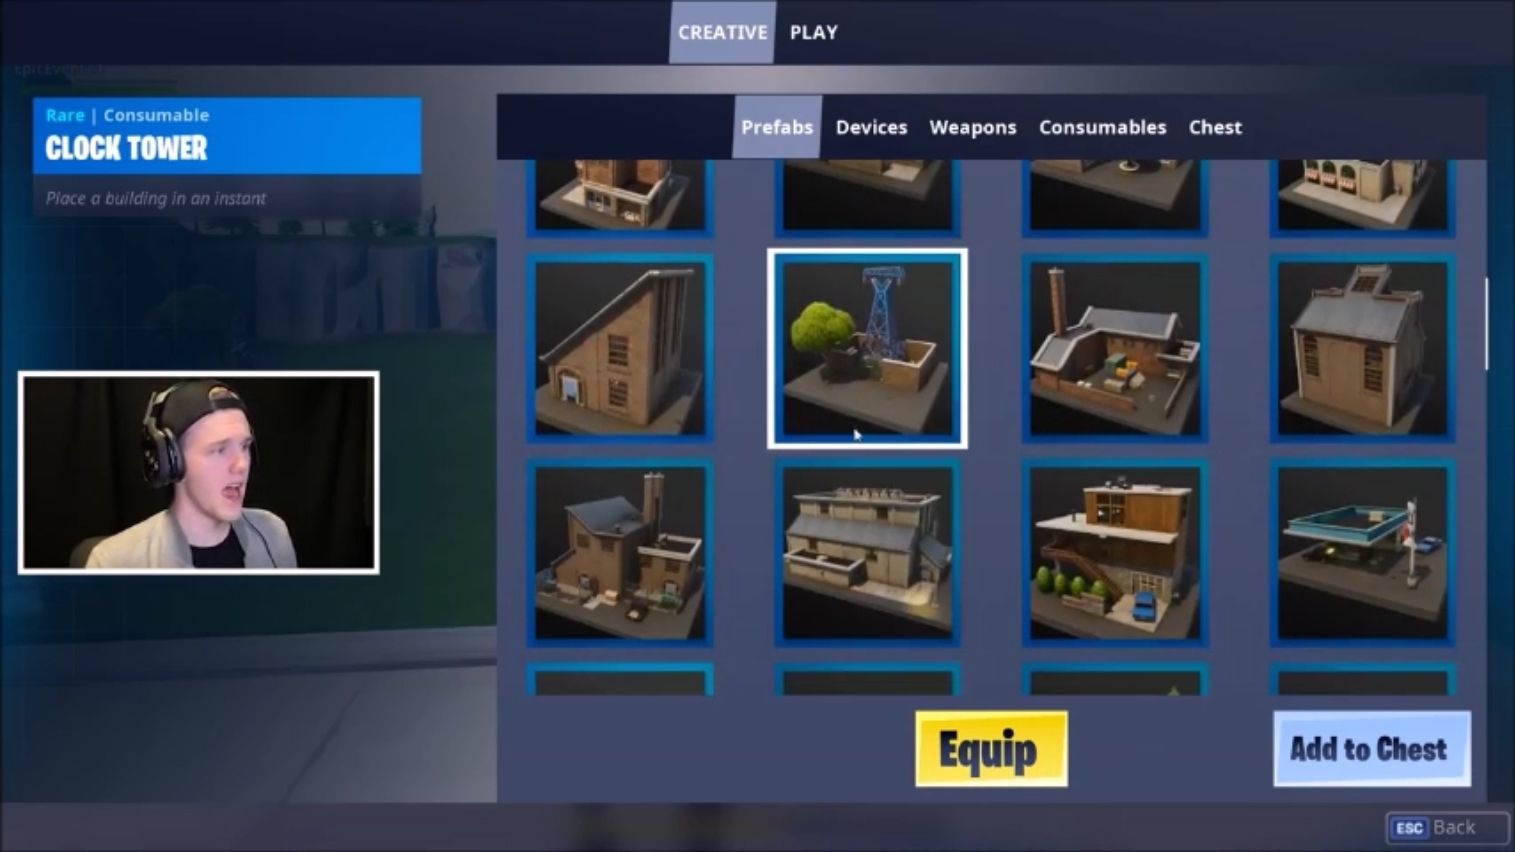 Leaked: Creative Mode is coming to Fortnite